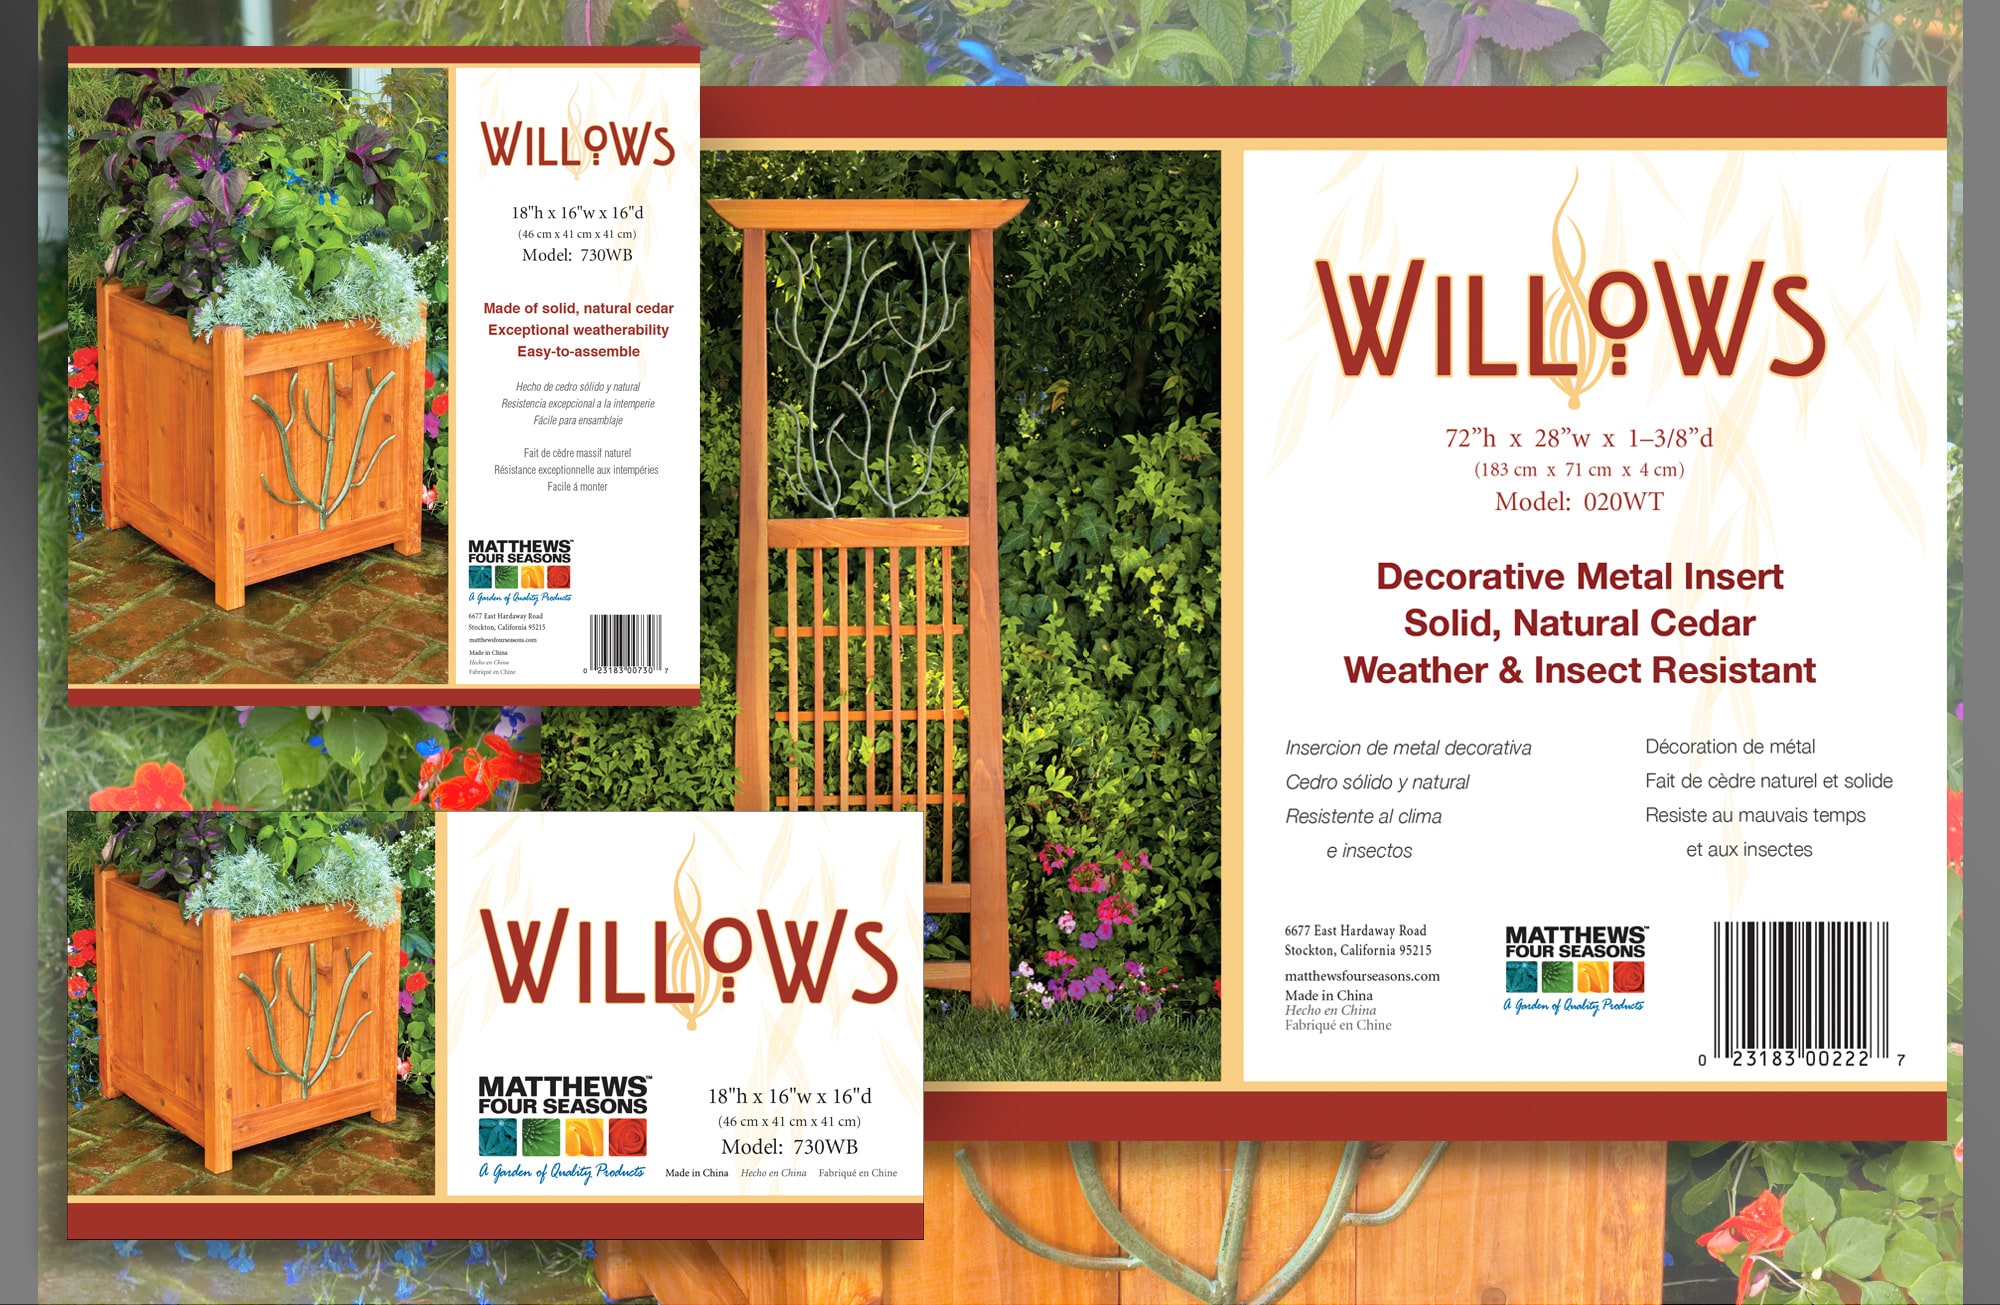  USA, Willows Brand, Collections Box and Trellis Label Packaging 